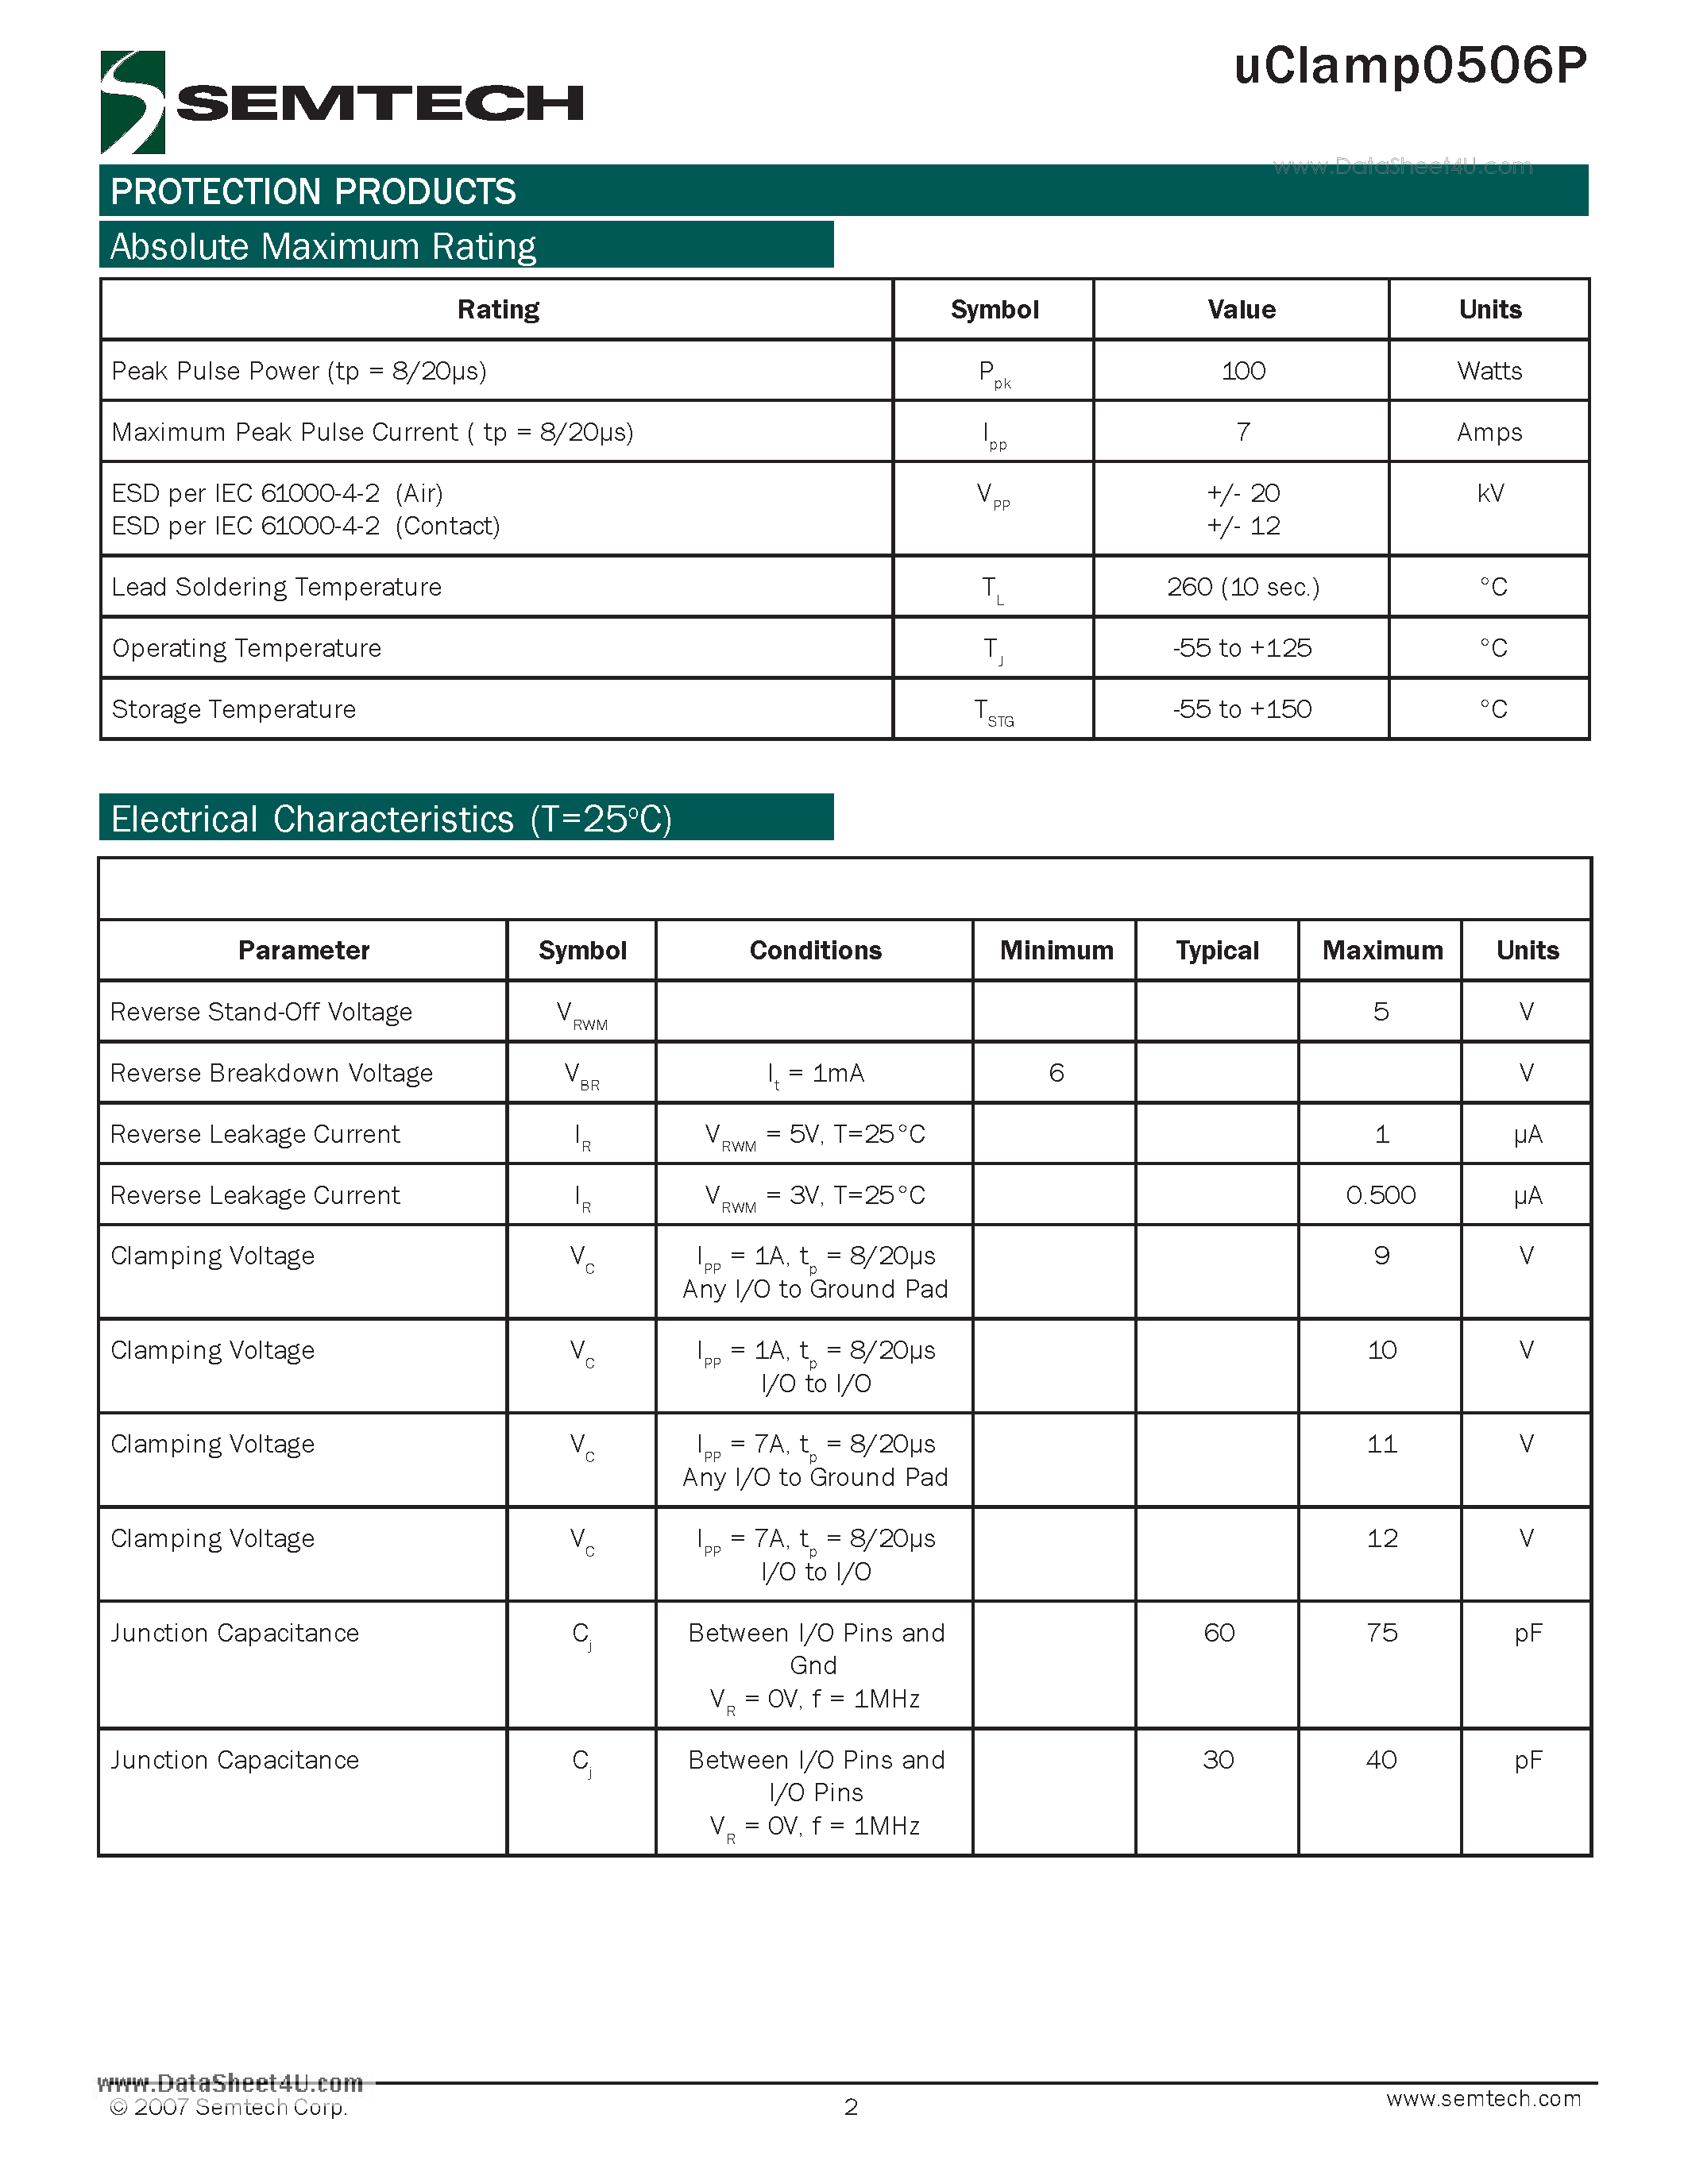 Datasheet UCLAMP0506P - 6-Line ESD protection Array page 2